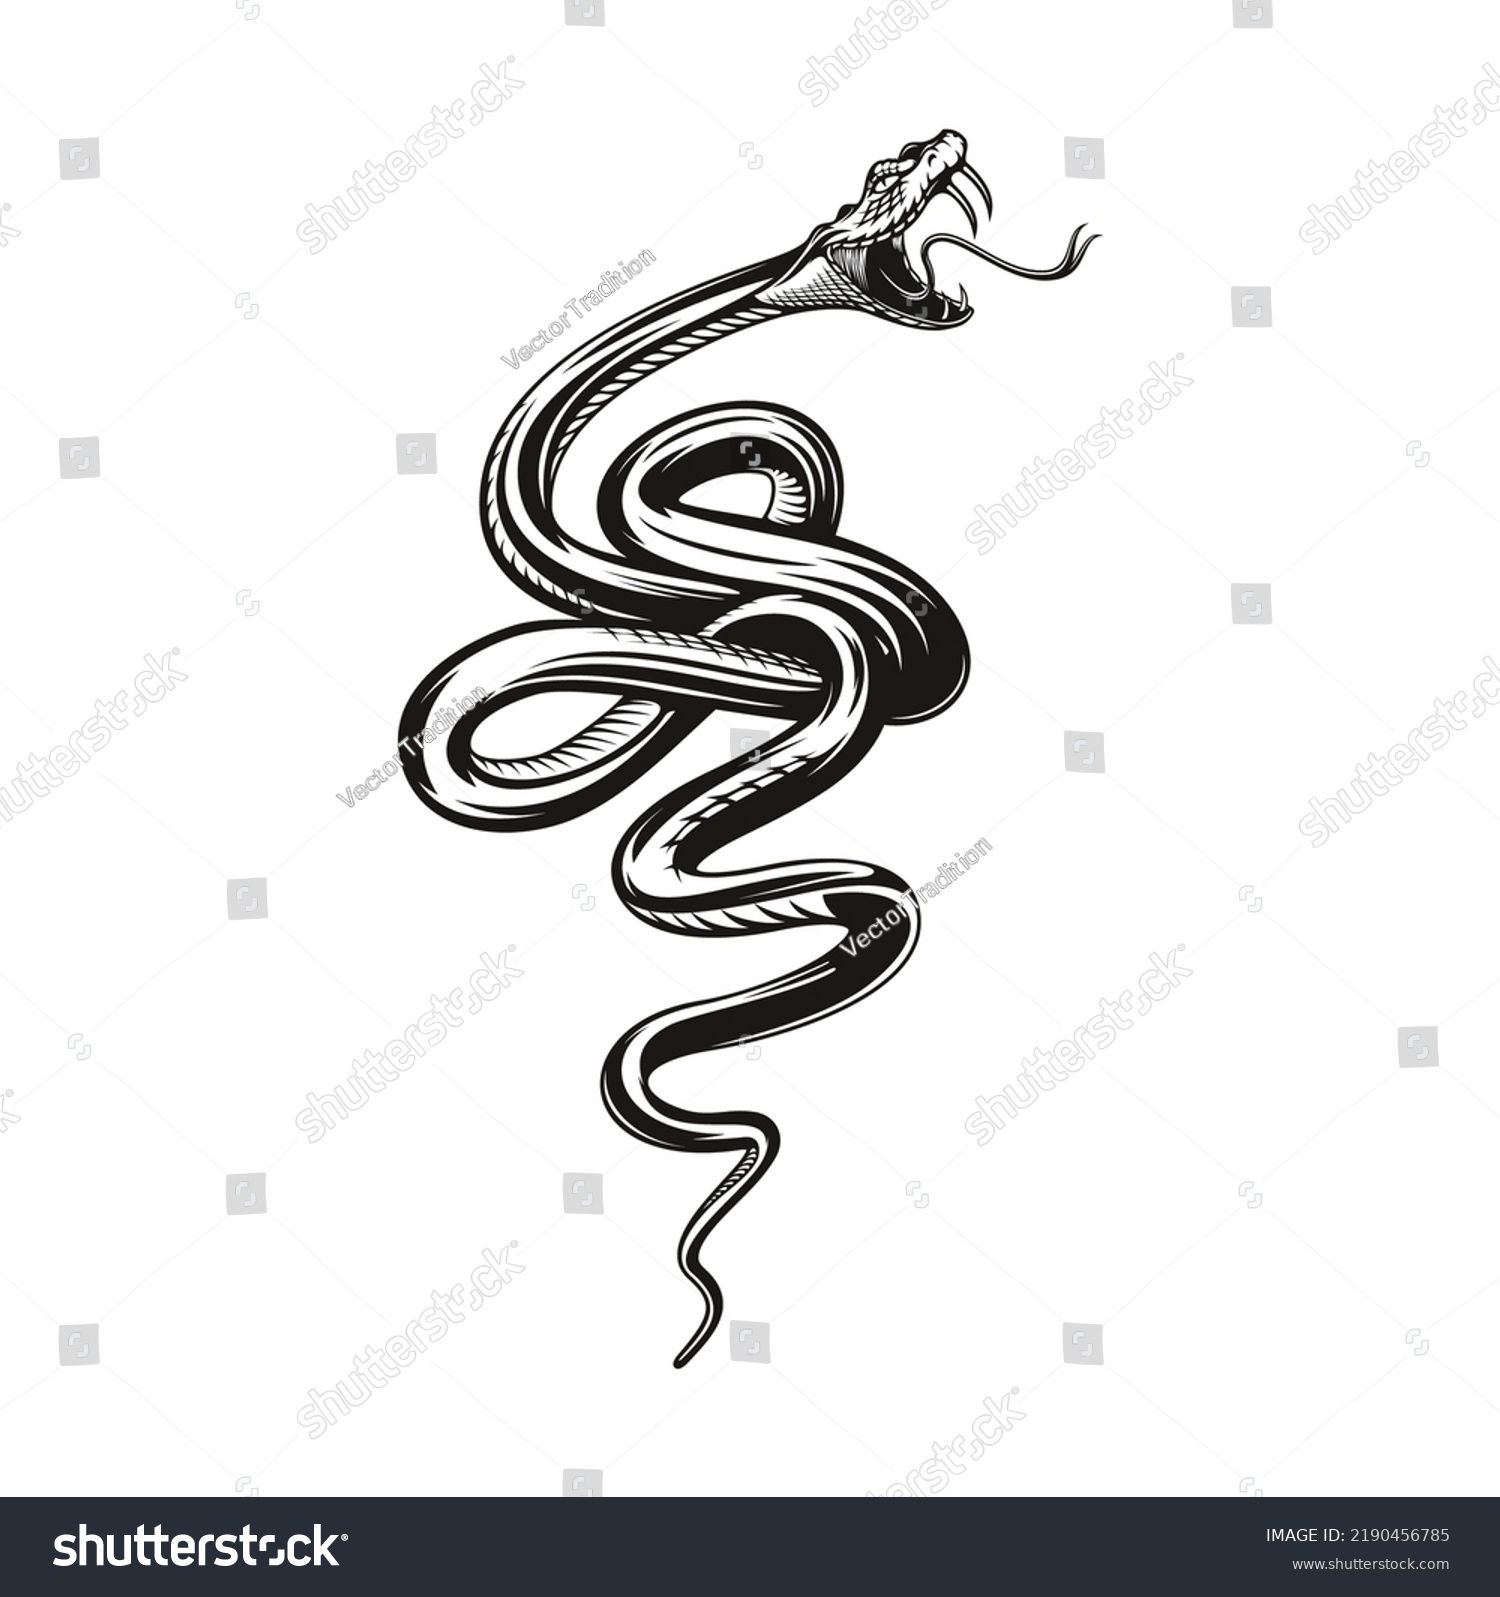 SVG of Snake tattoo, angry black viper or serpent, vector rock or biker club mascot. Angry snake bite with fangs, viper or anaconda serpent in angry attack for tattoo svg